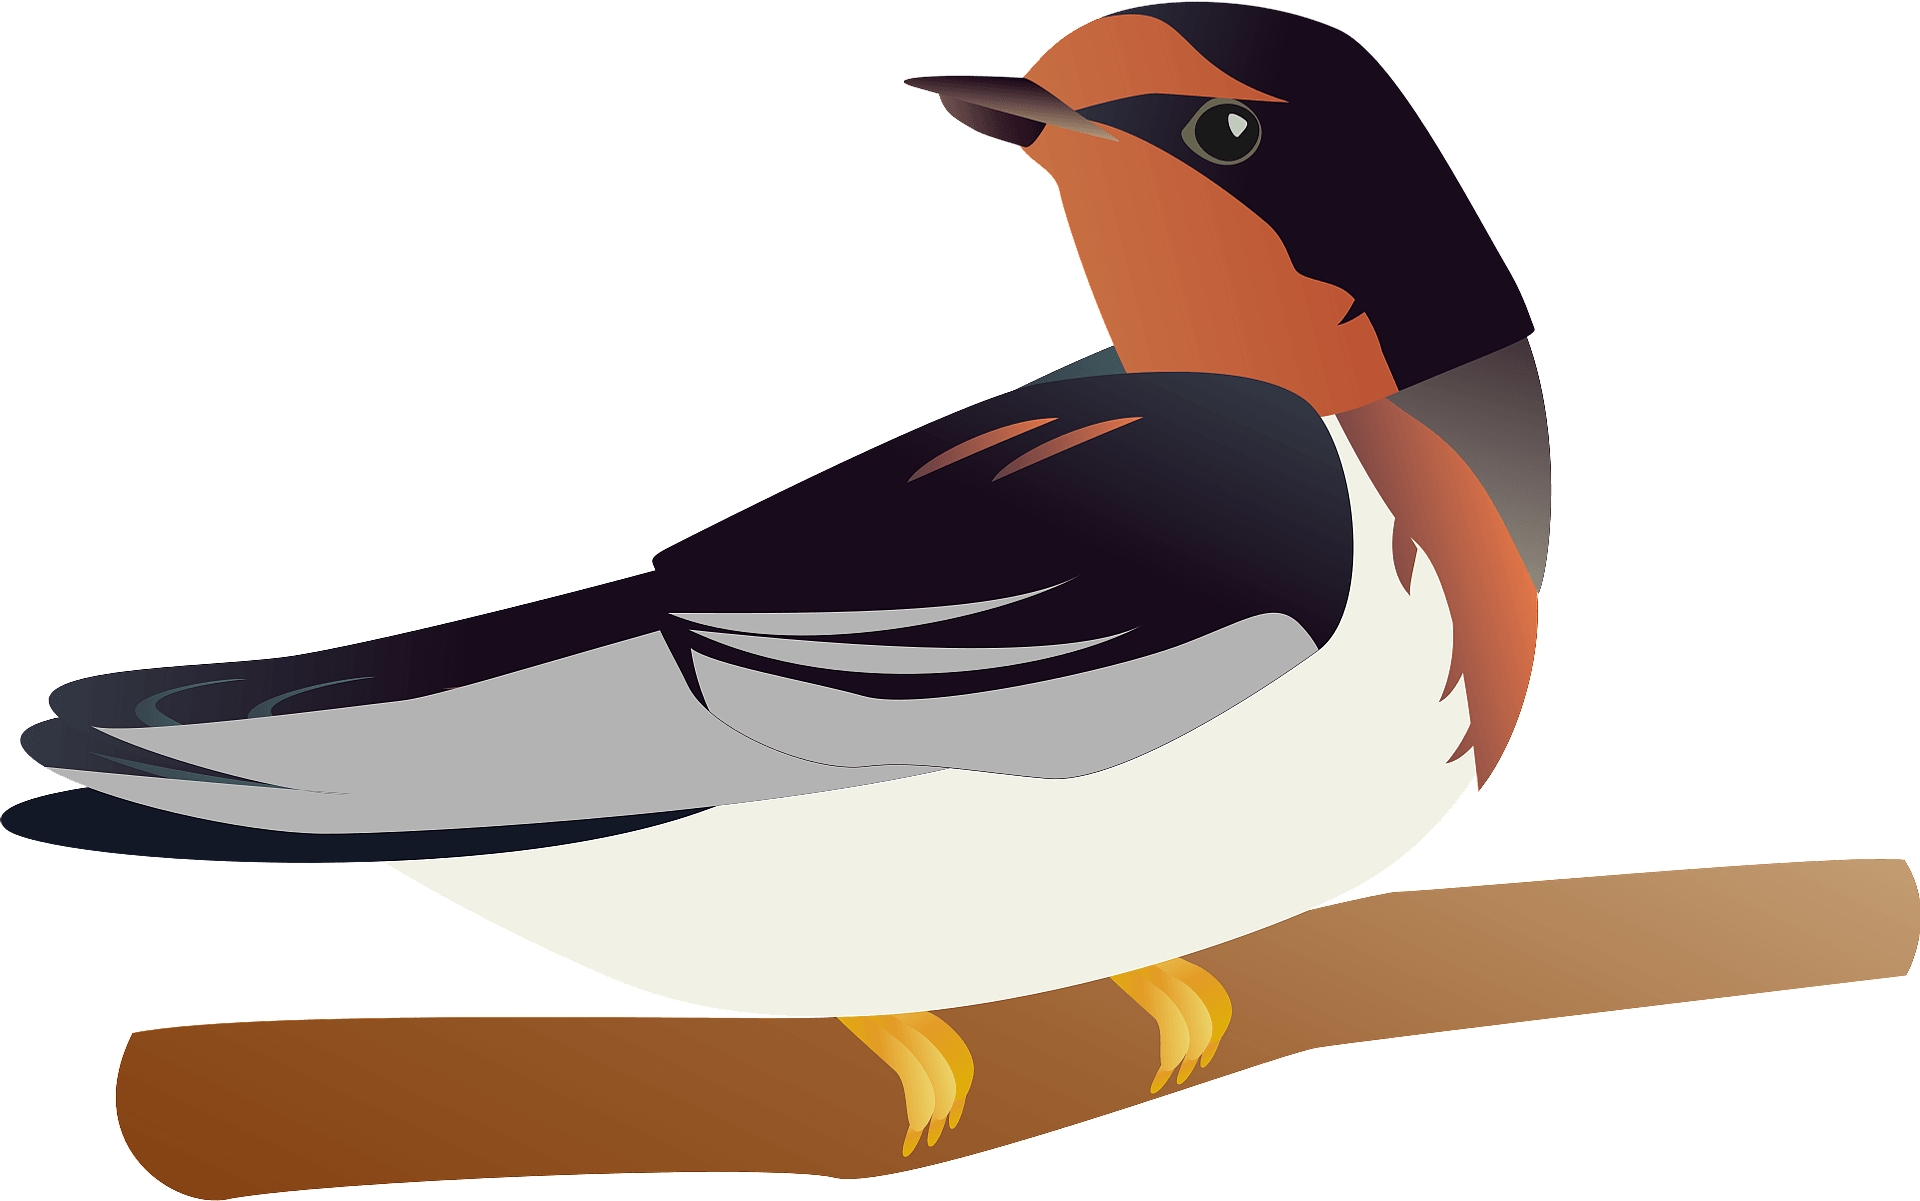 Swallow PNG High Quality Image